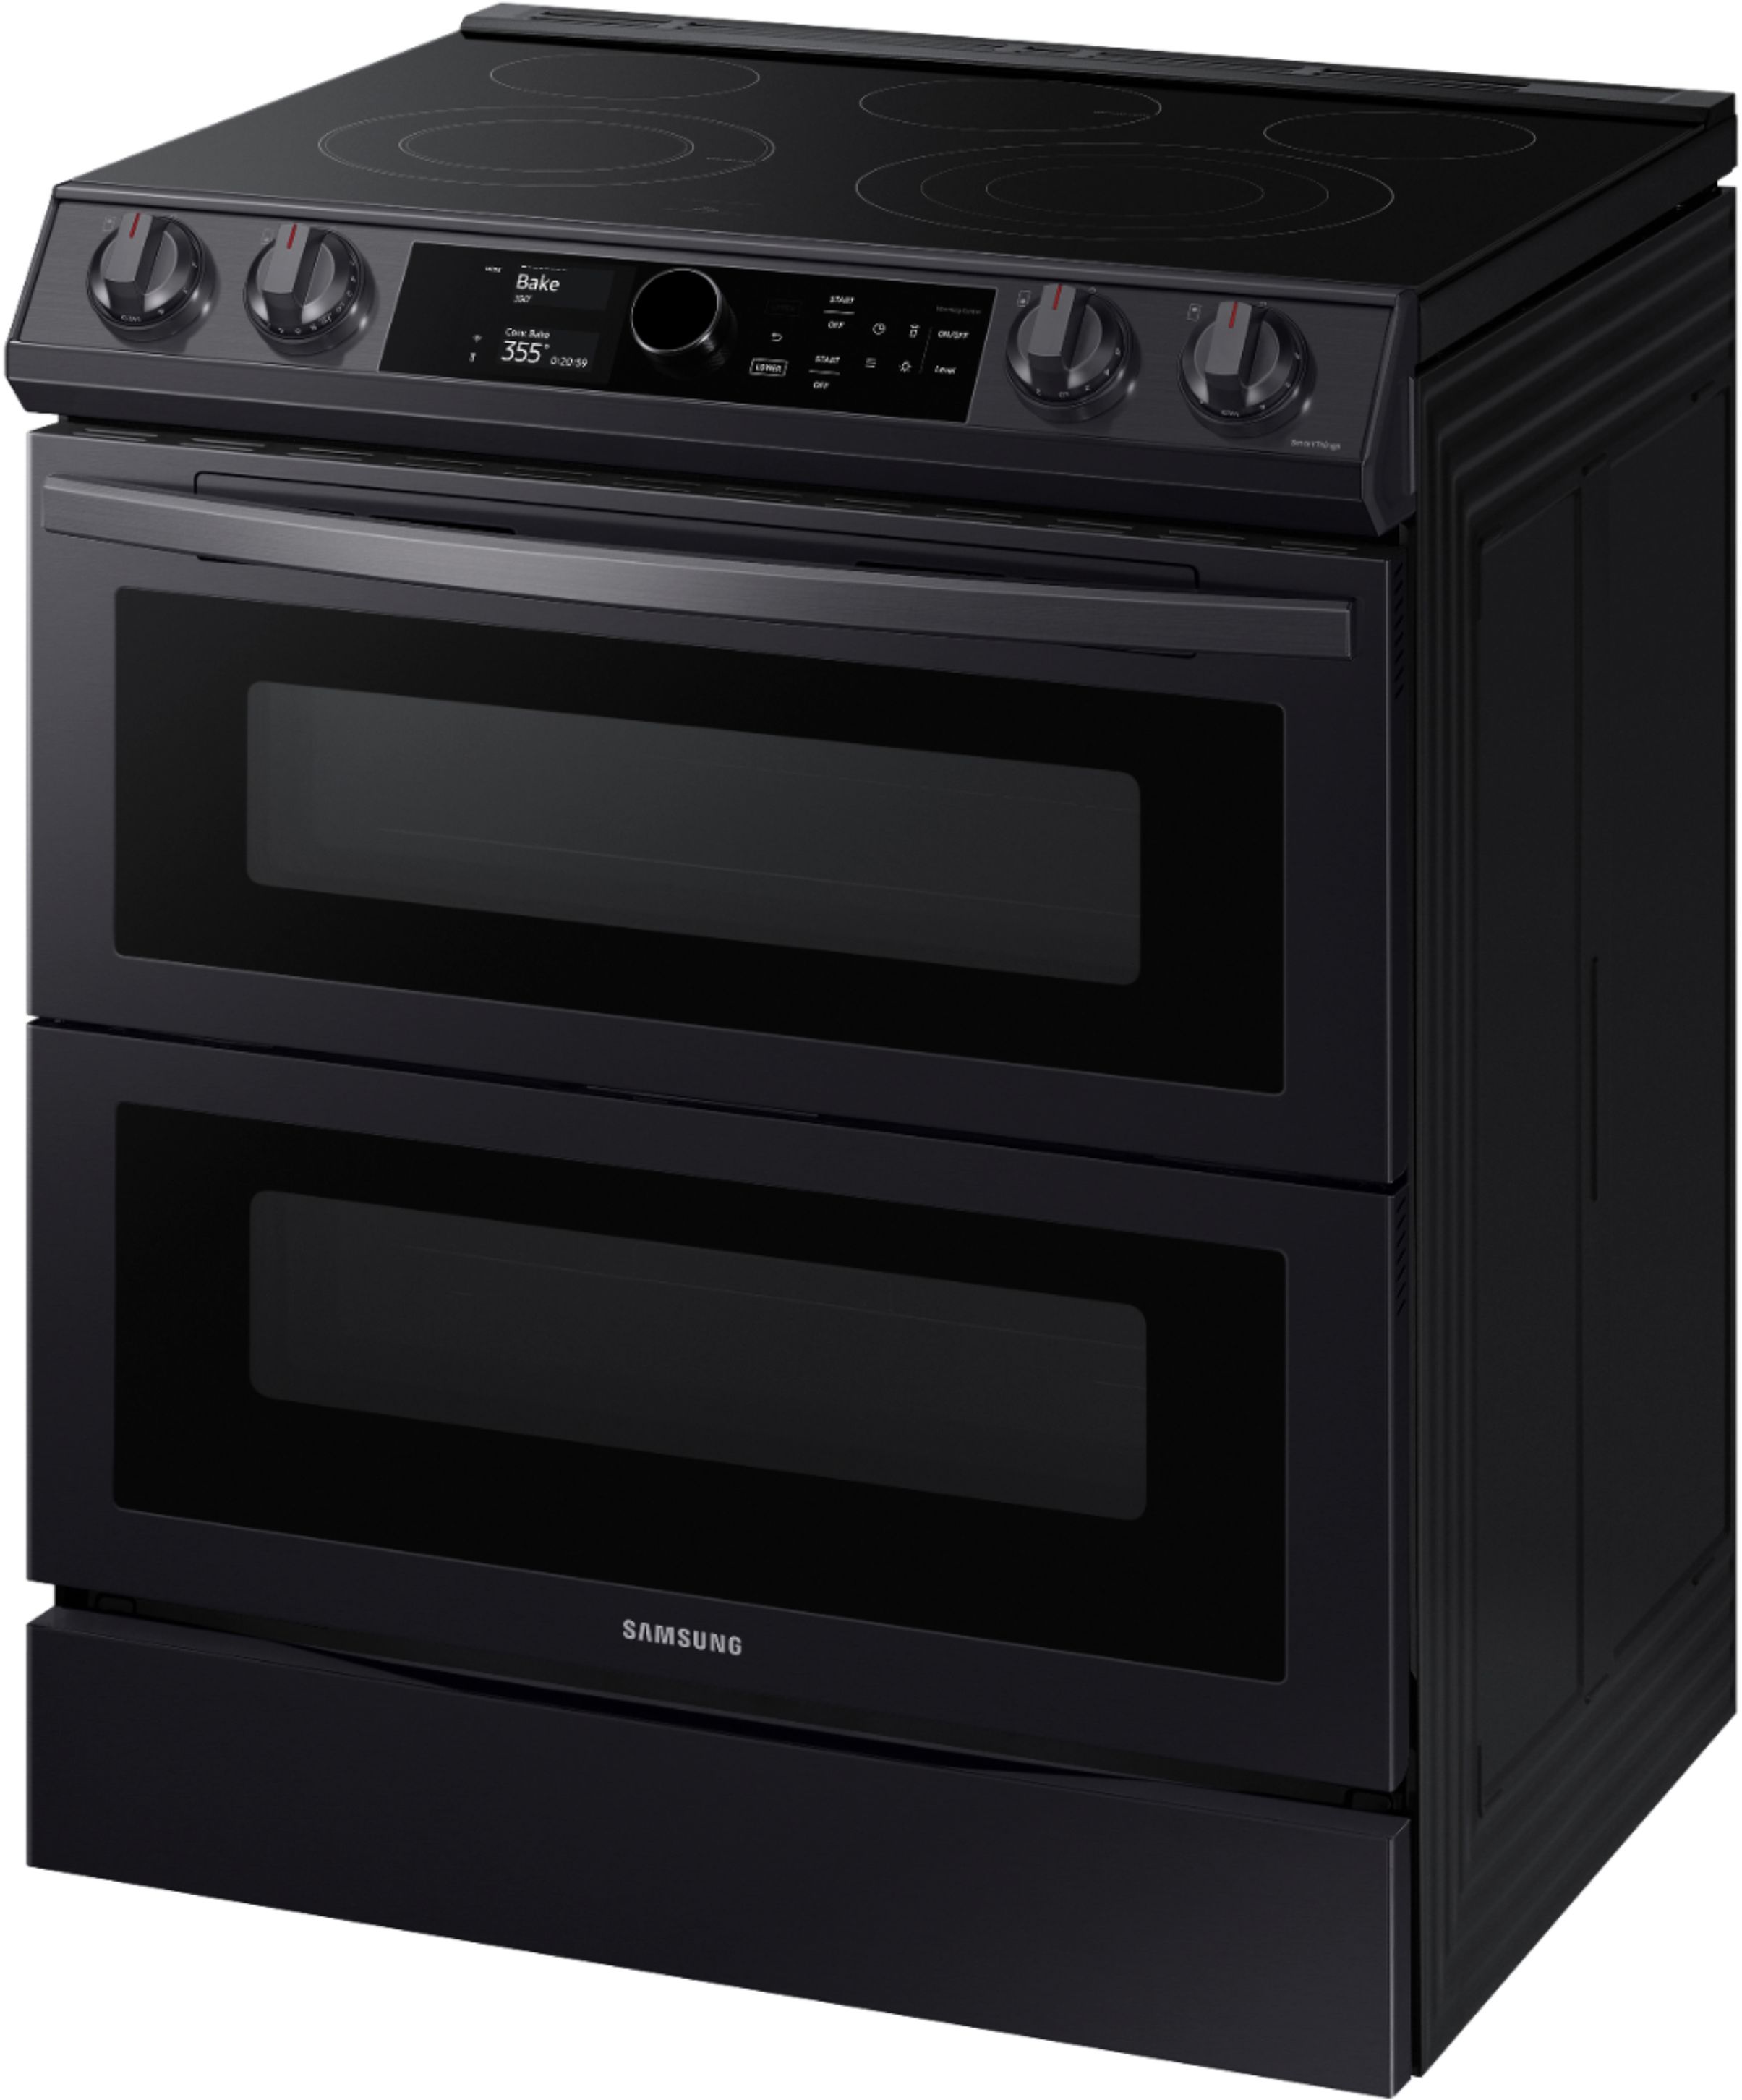 Left View: Samsung - 6.3 cu. ft. Flex Duo Front Control Slide-in Electric Range with Smart Dial, Air Fry & Wi-Fi - Black stainless steel